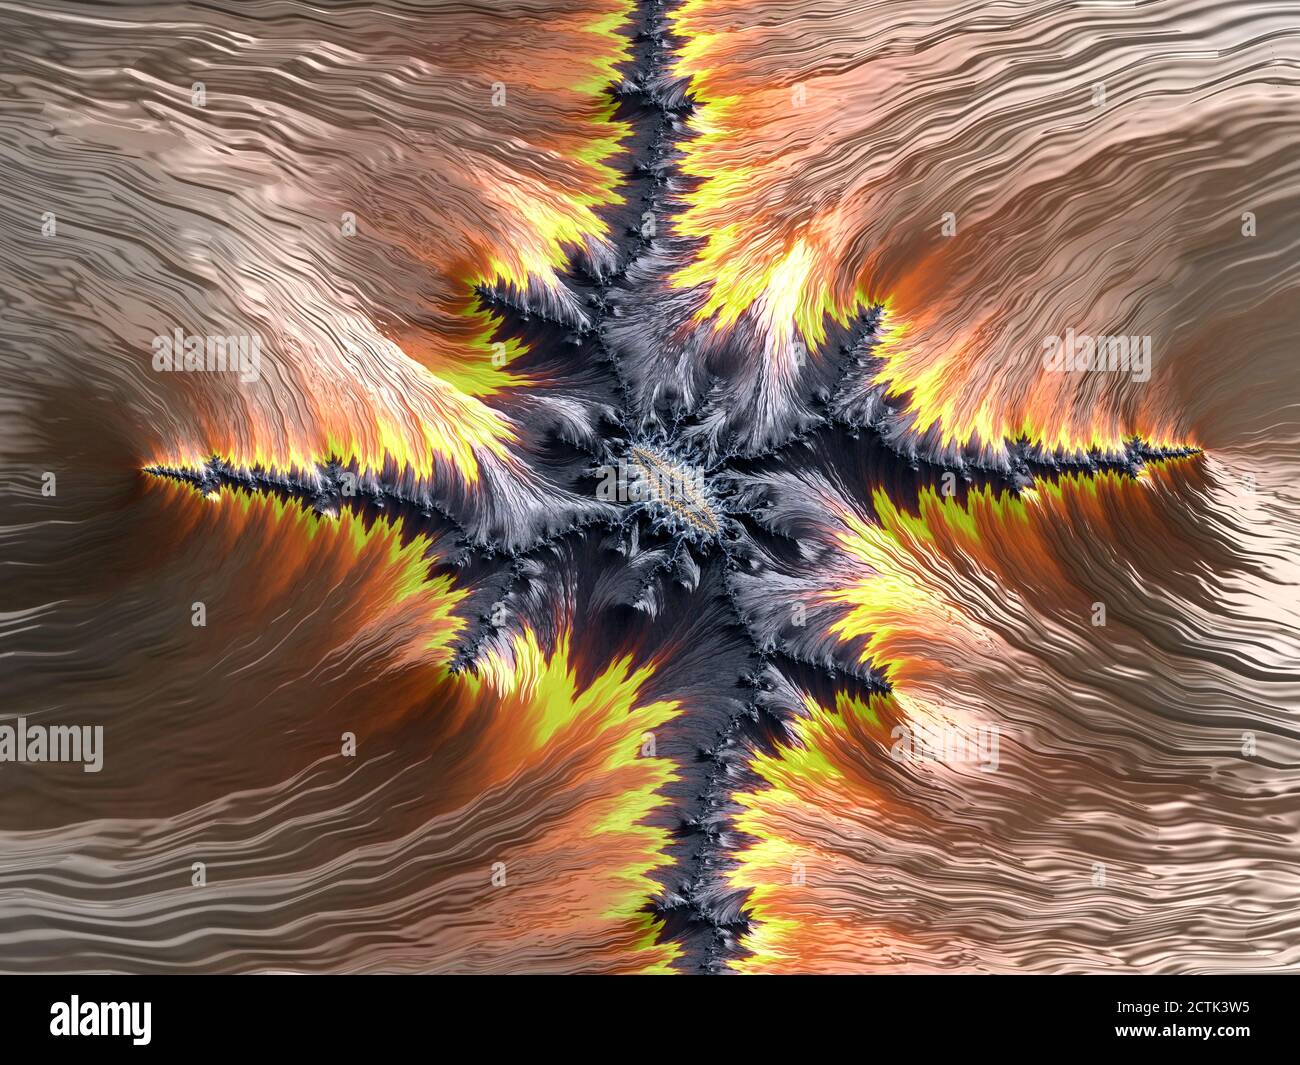 An abstract fractal flaming background Stock Photo